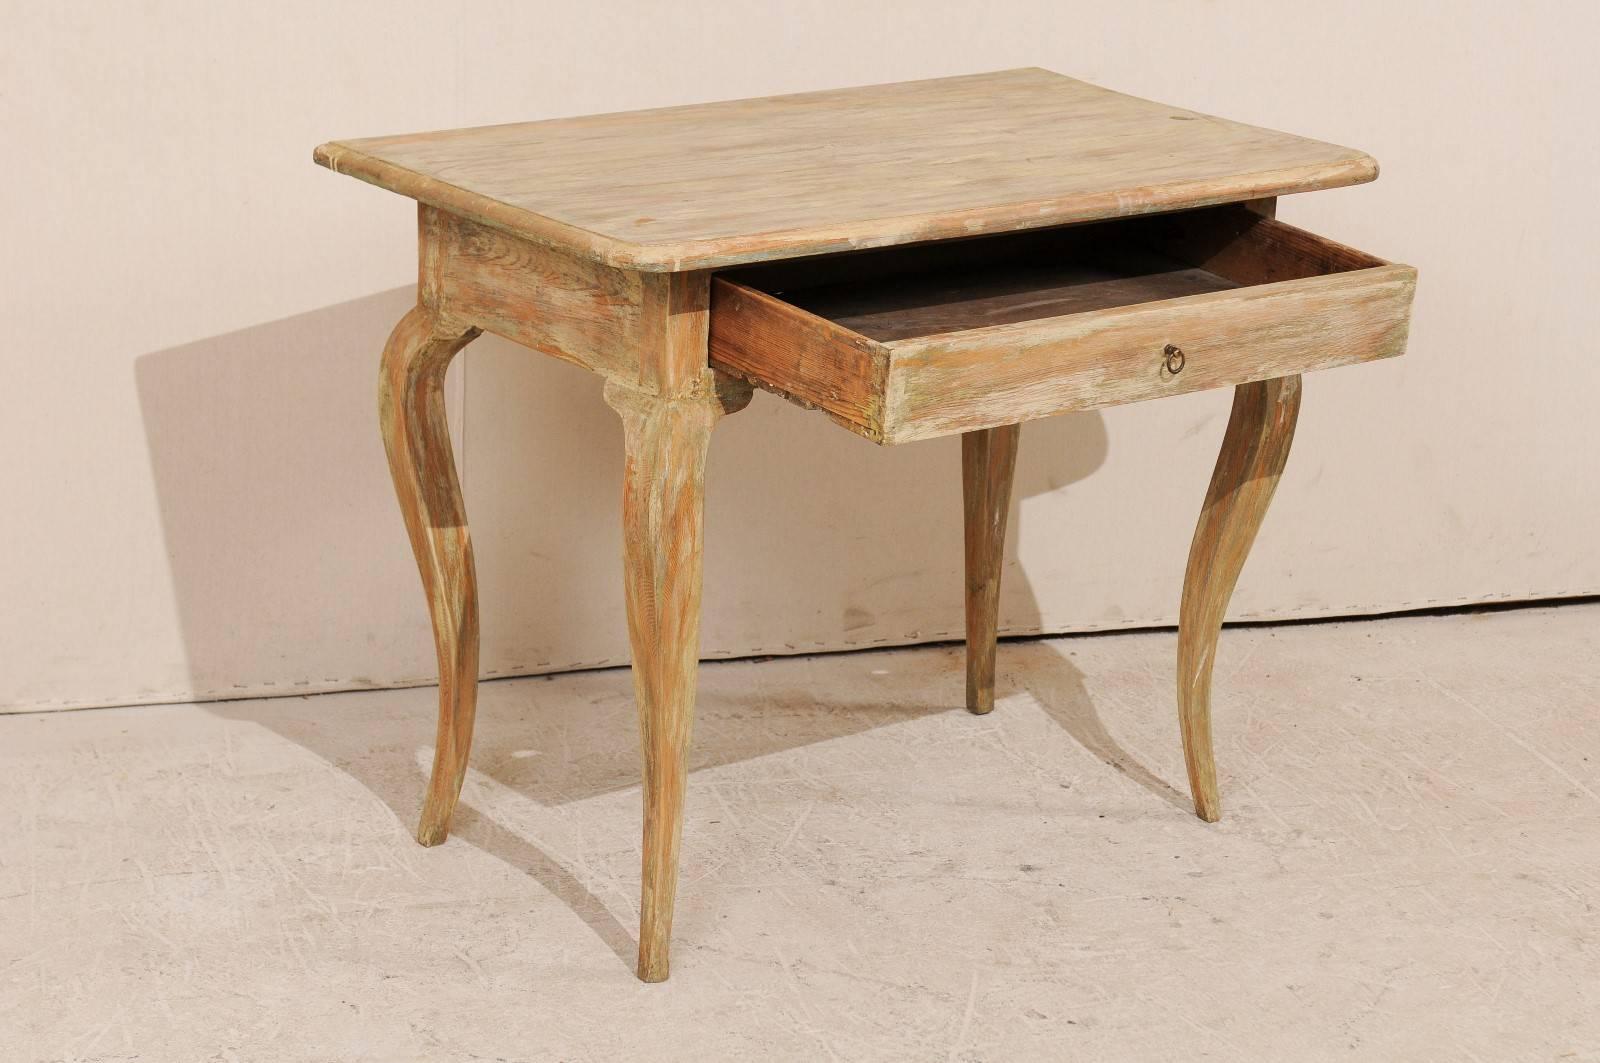 Swedish Period Rococo Painted Wood Side Table from the 18th Century with Cabriole Legs